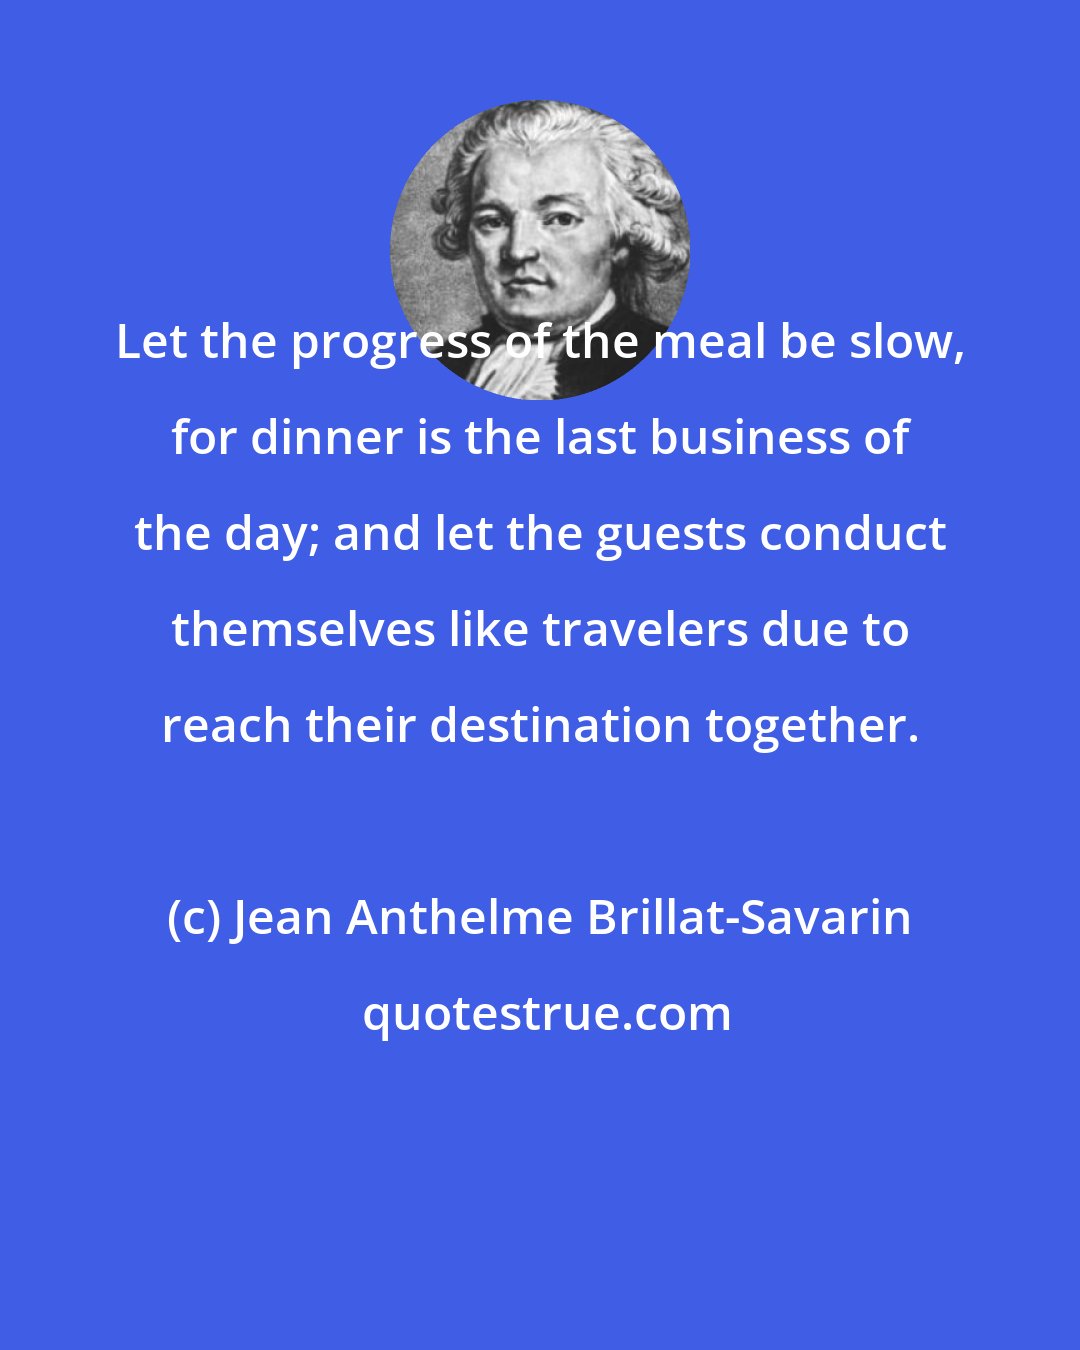 Jean Anthelme Brillat-Savarin: Let the progress of the meal be slow, for dinner is the last business of the day; and let the guests conduct themselves like travelers due to reach their destination together.